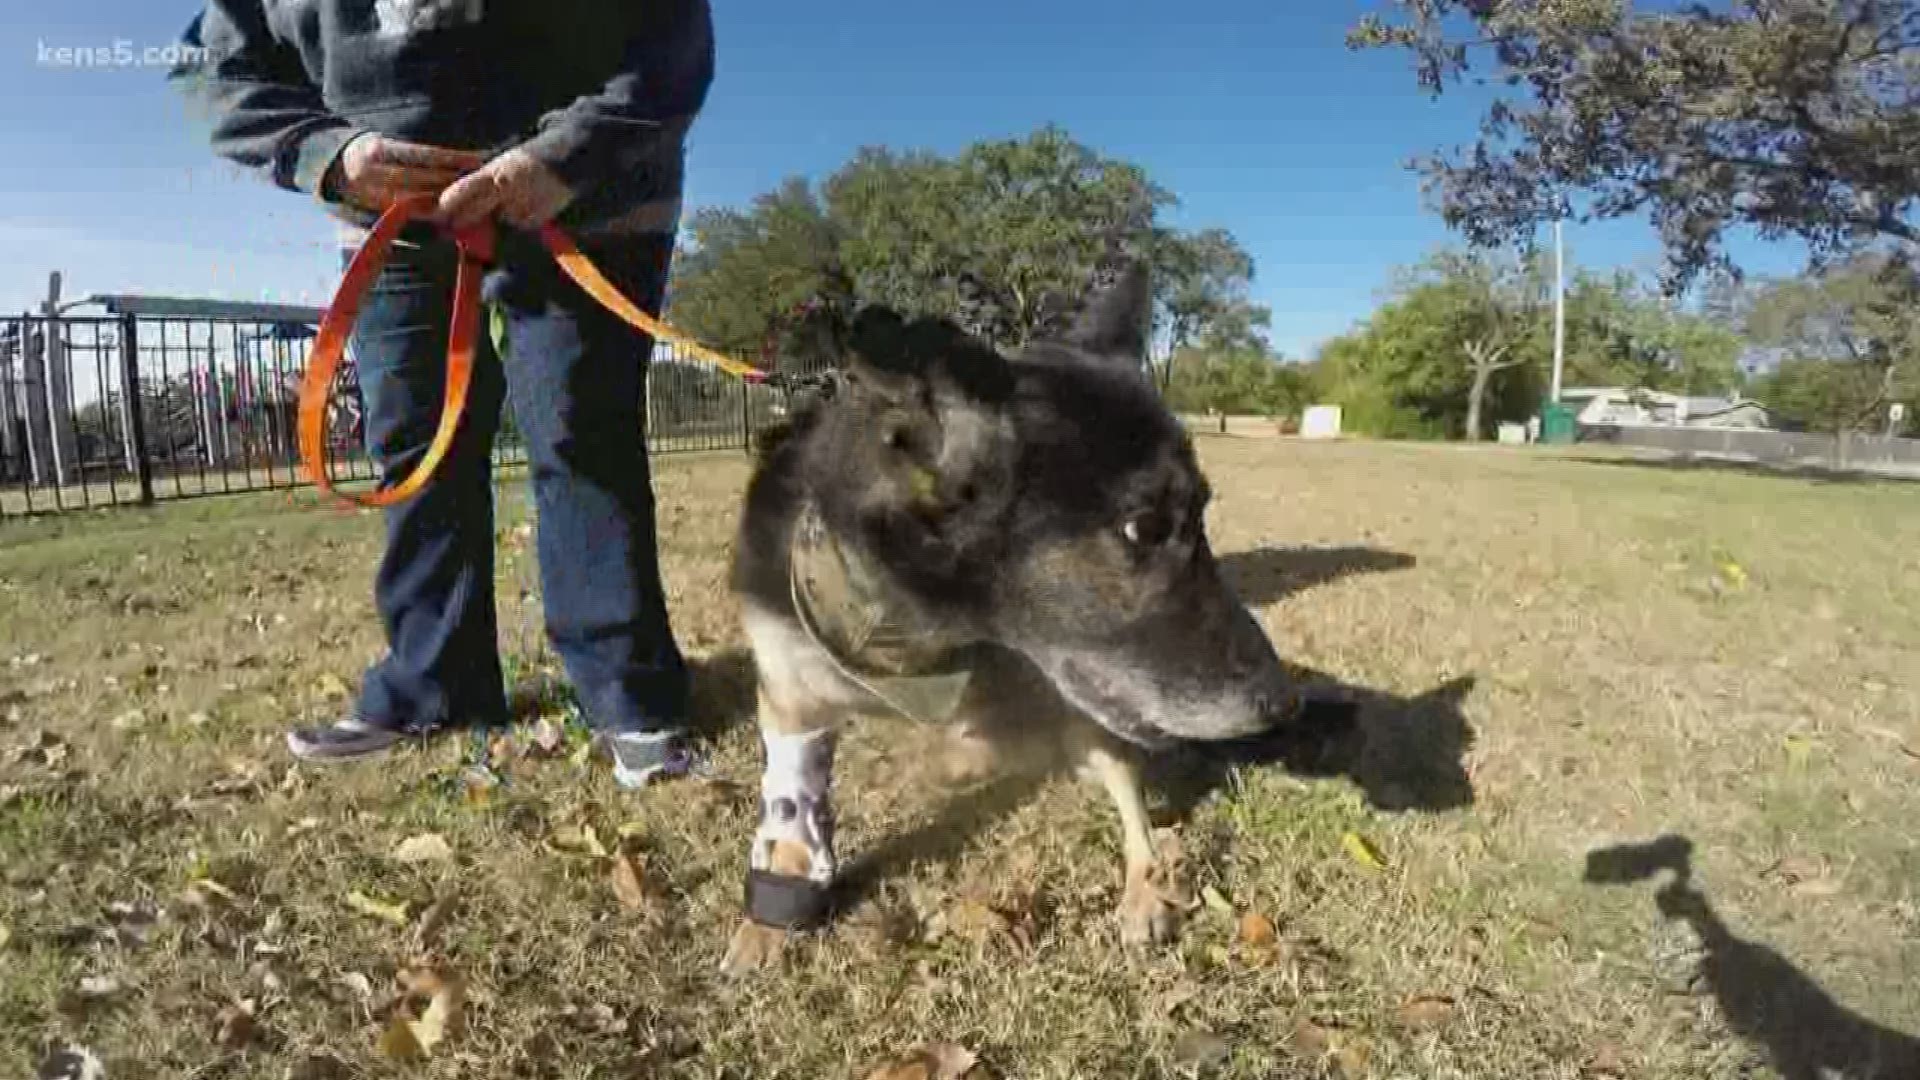 In this week's Mission SA, Eyewitness News reporter Sharon Ko introduces us to an army veteran who is saving these canines with a global reach.